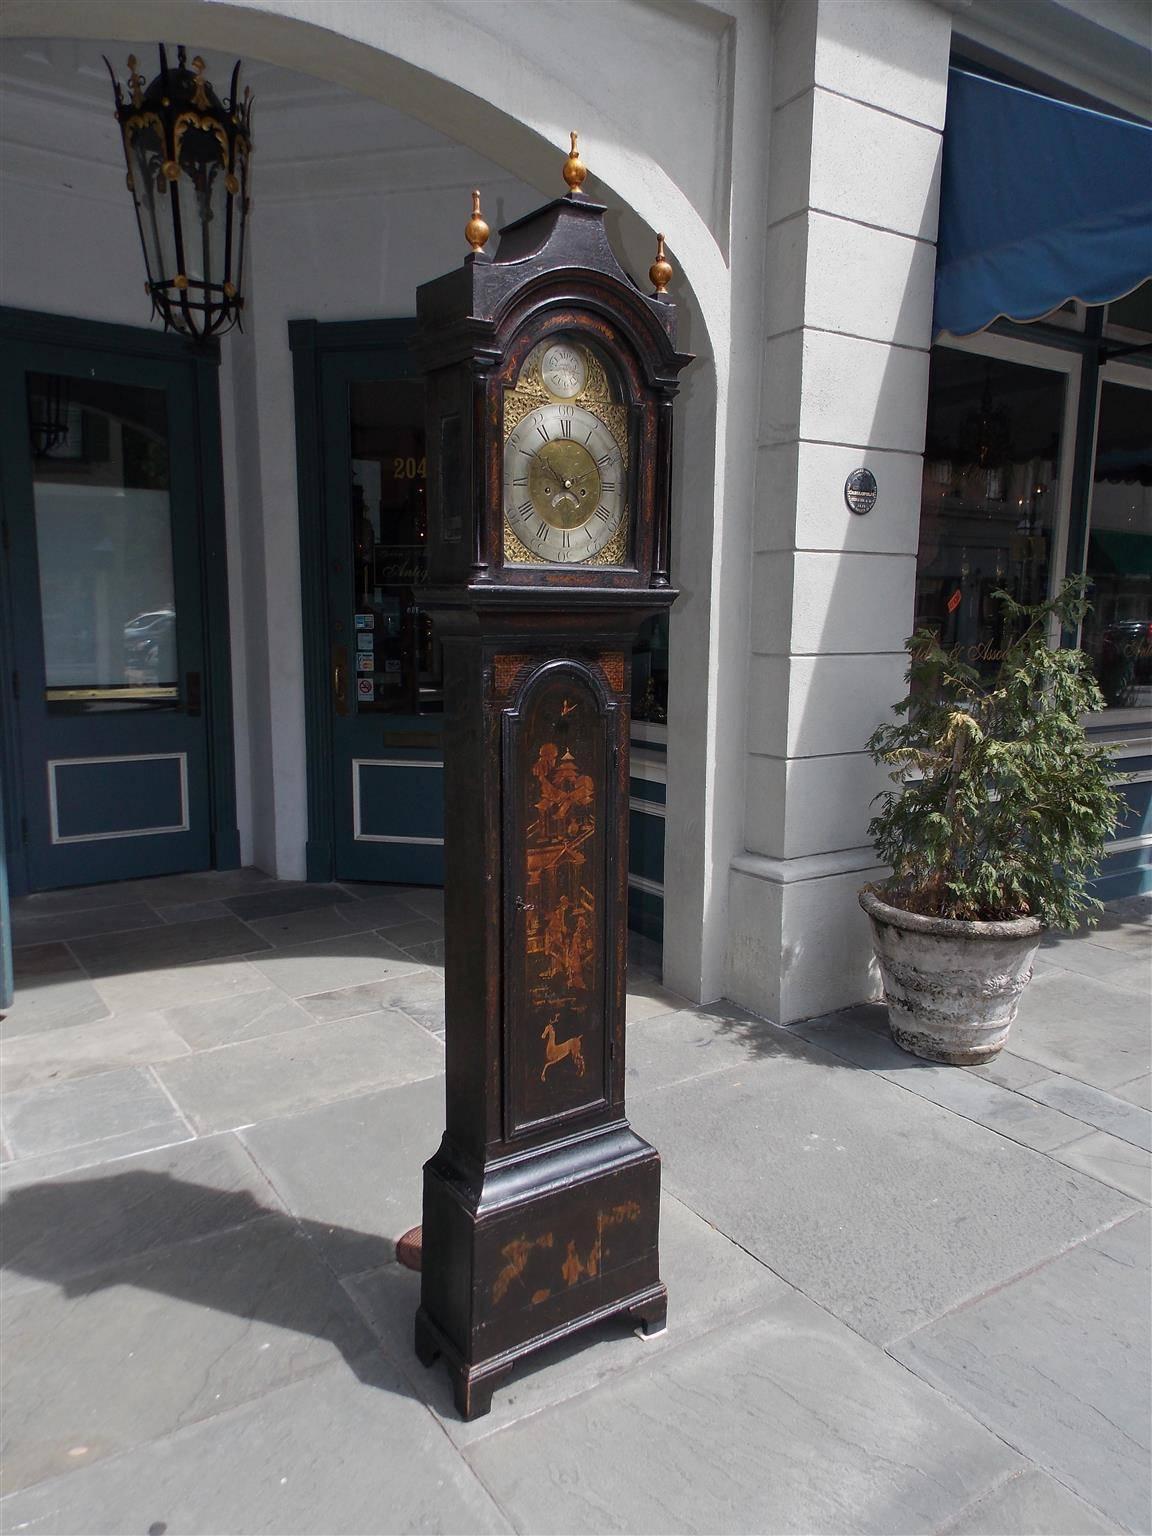 English chinoiserie gilt and black lacquered tall case clock with flanking gilt bulbous finials, arched dome with a steel numeral engraved face surrounded by urn floral ormolu, pagoda and figural gilt trunk revealing the original brass weights and